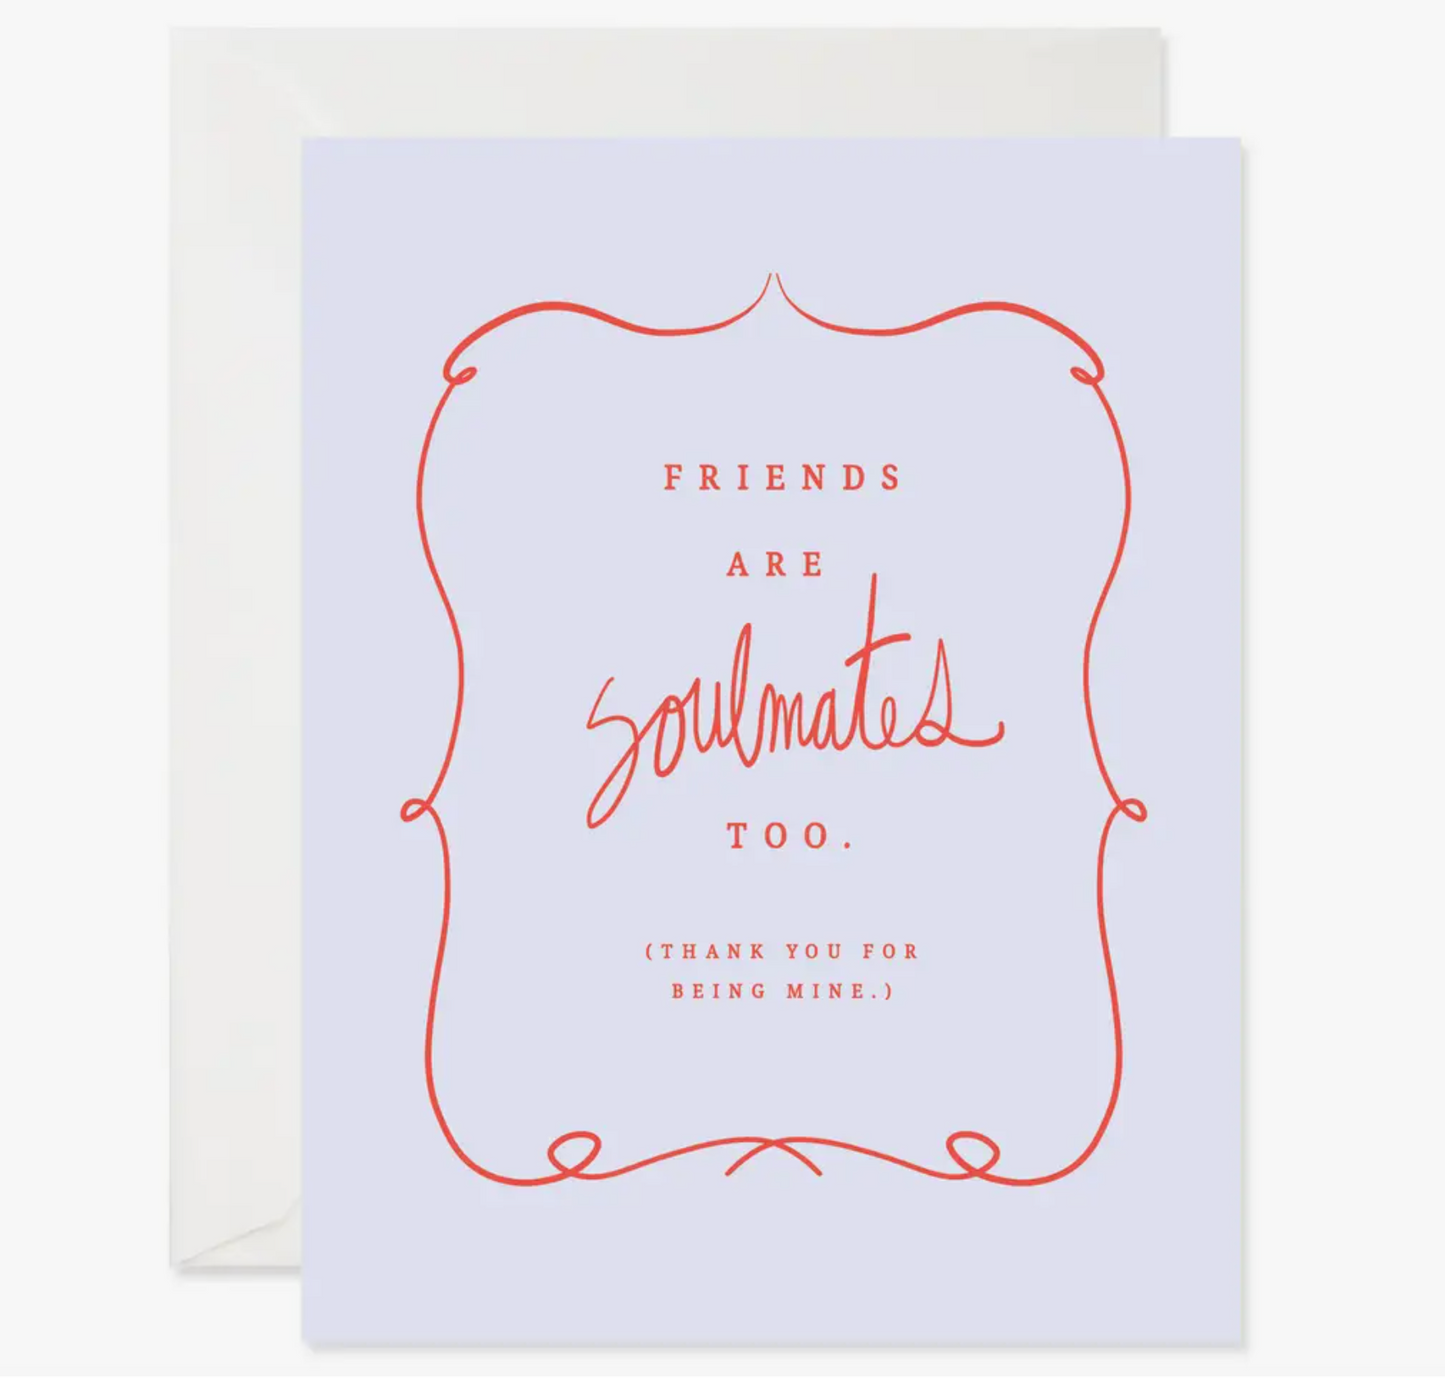 Friends Are Soulmates Too Card